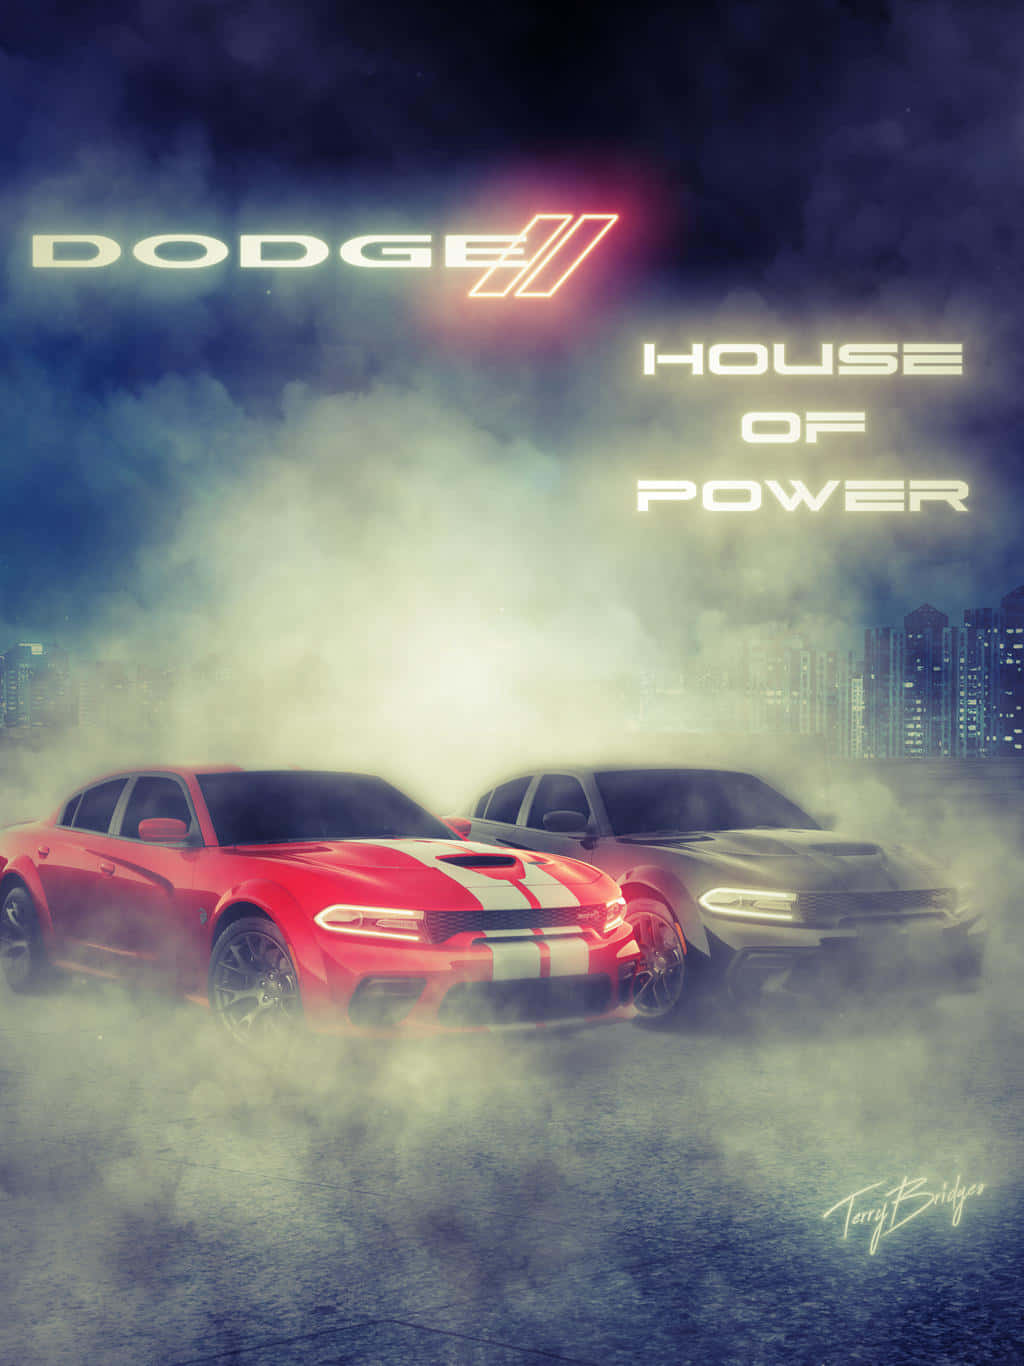 Dodgehouse Of Power - Mp3